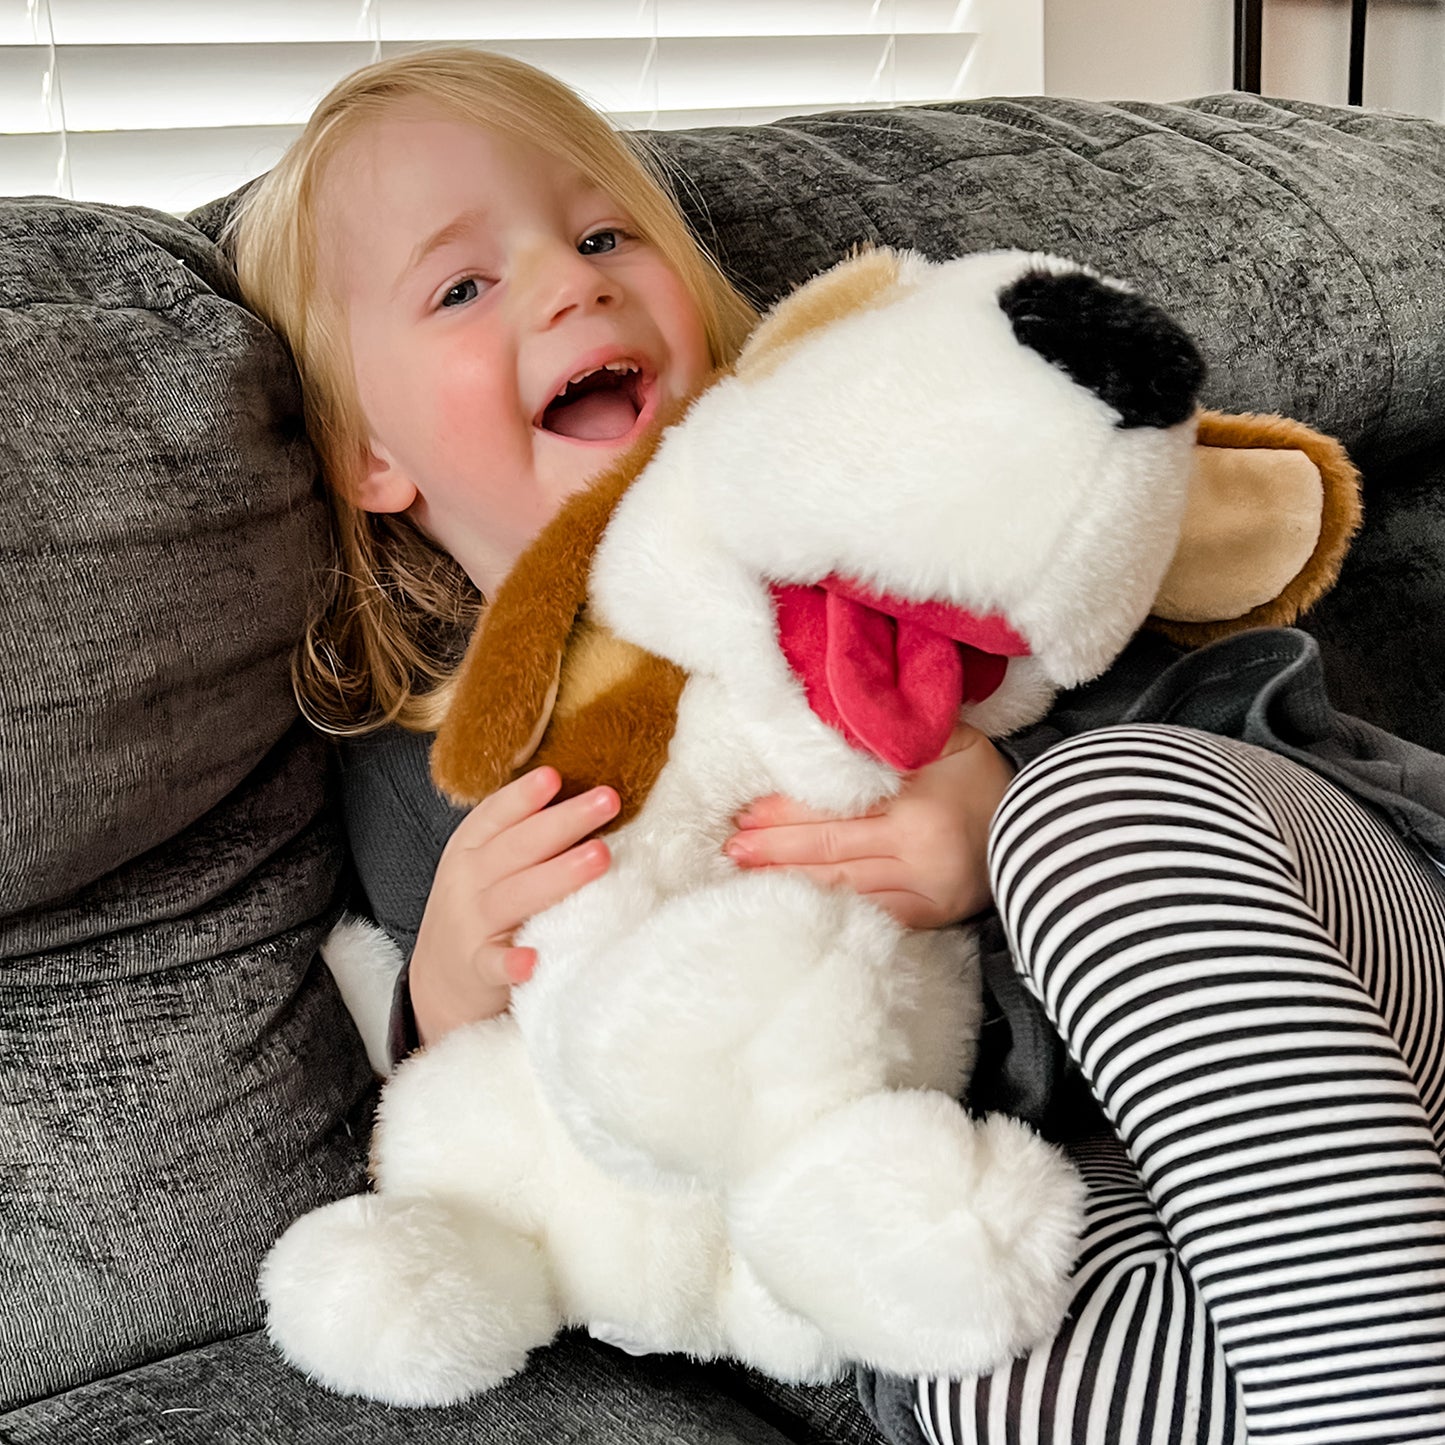 Digger Dog Puppet by SimplyFun is great for imaginative play for ages 4 and up